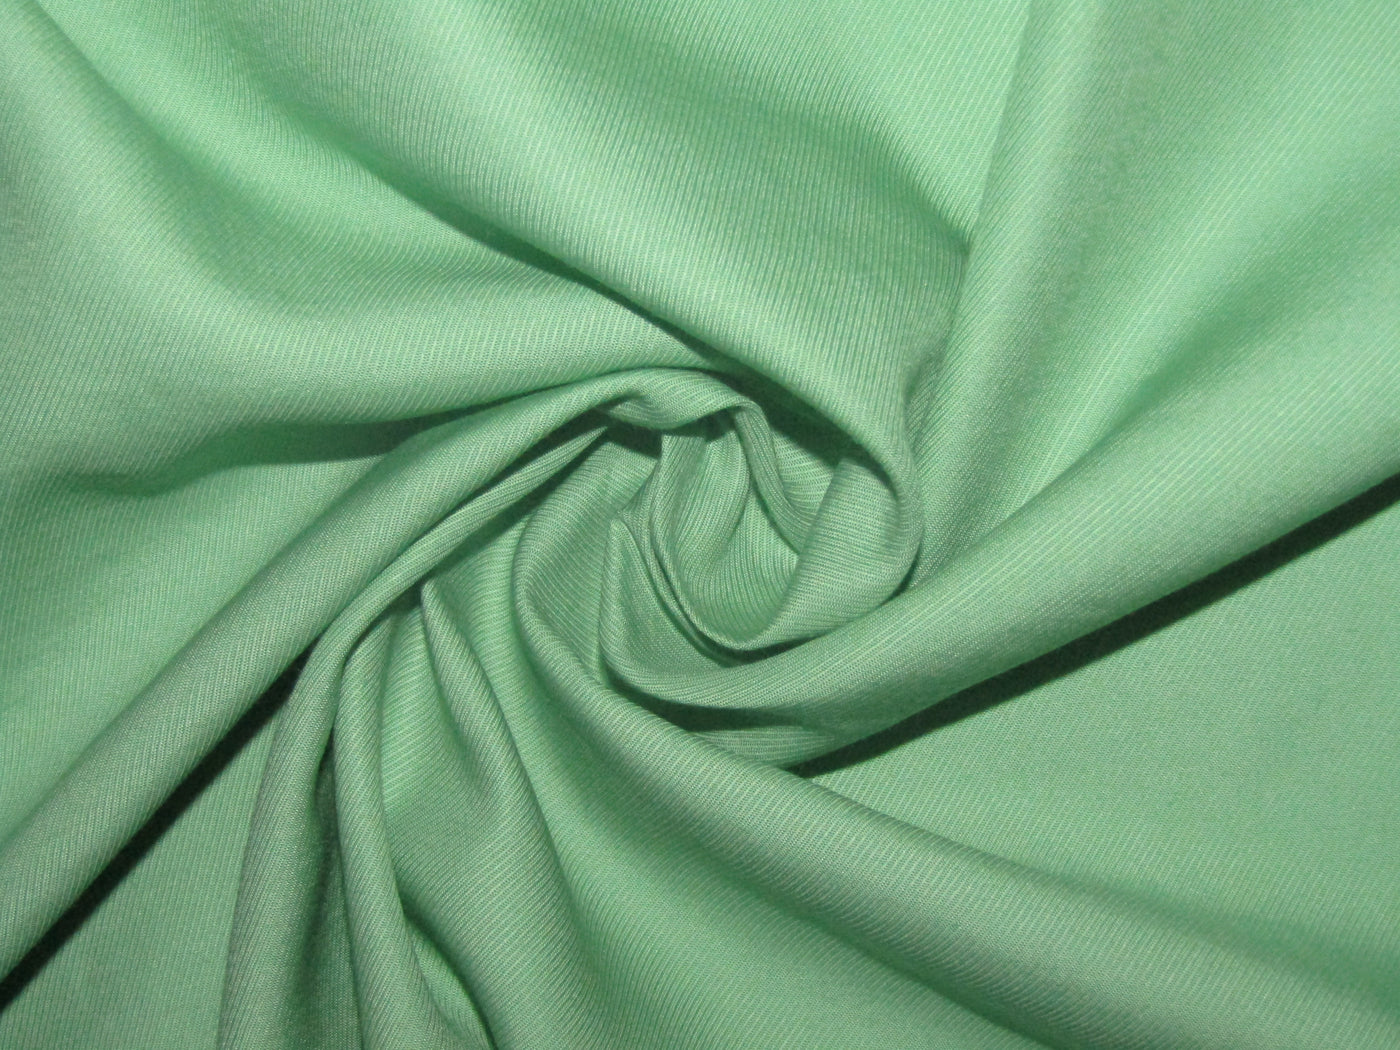 SUITING 100% TENCEL 350GRAMS/ 280GSM MADE IN INDIA 58" available in green/lilac/teal/rose pink and white ivory [15405-15409]